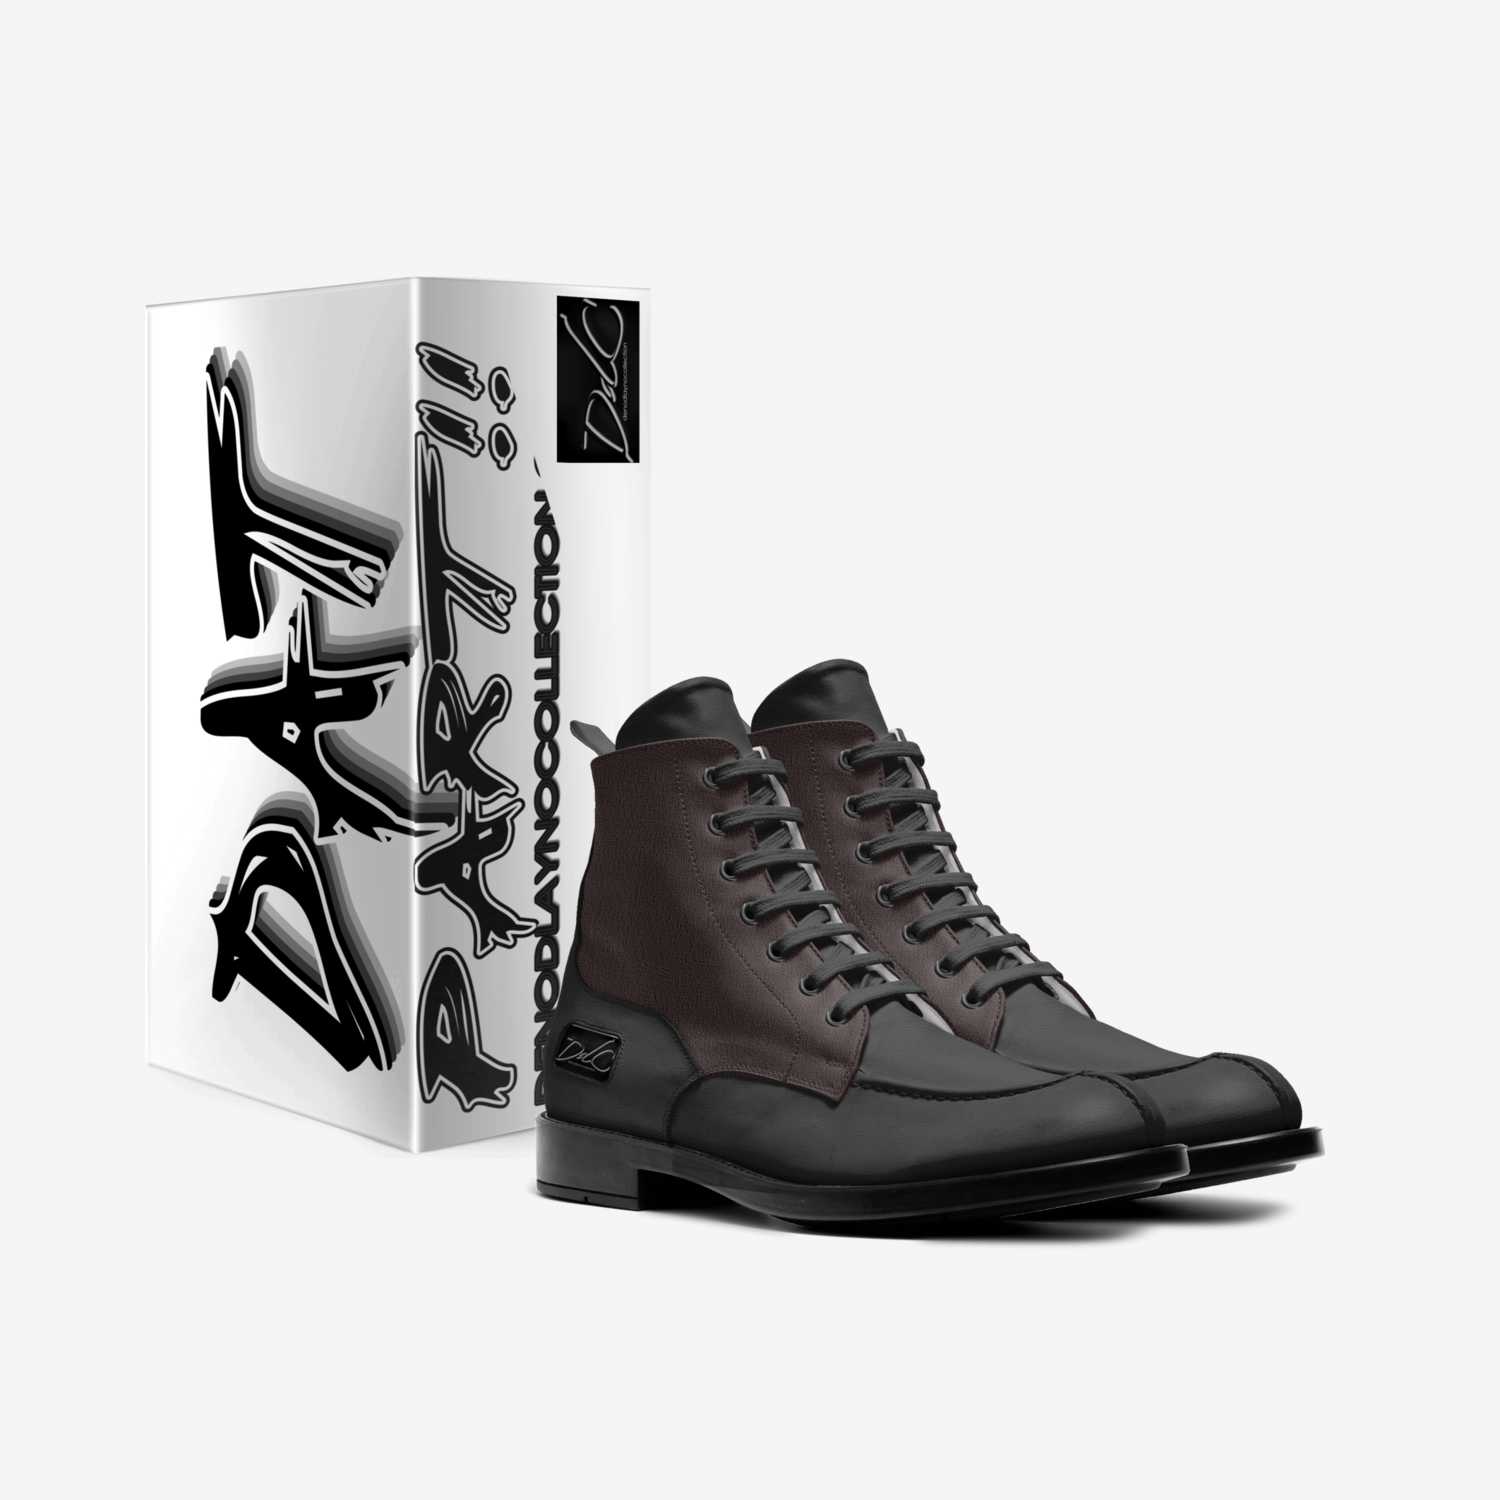 Elevation for men custom made in Italy shoes by Delano Varner | Box view